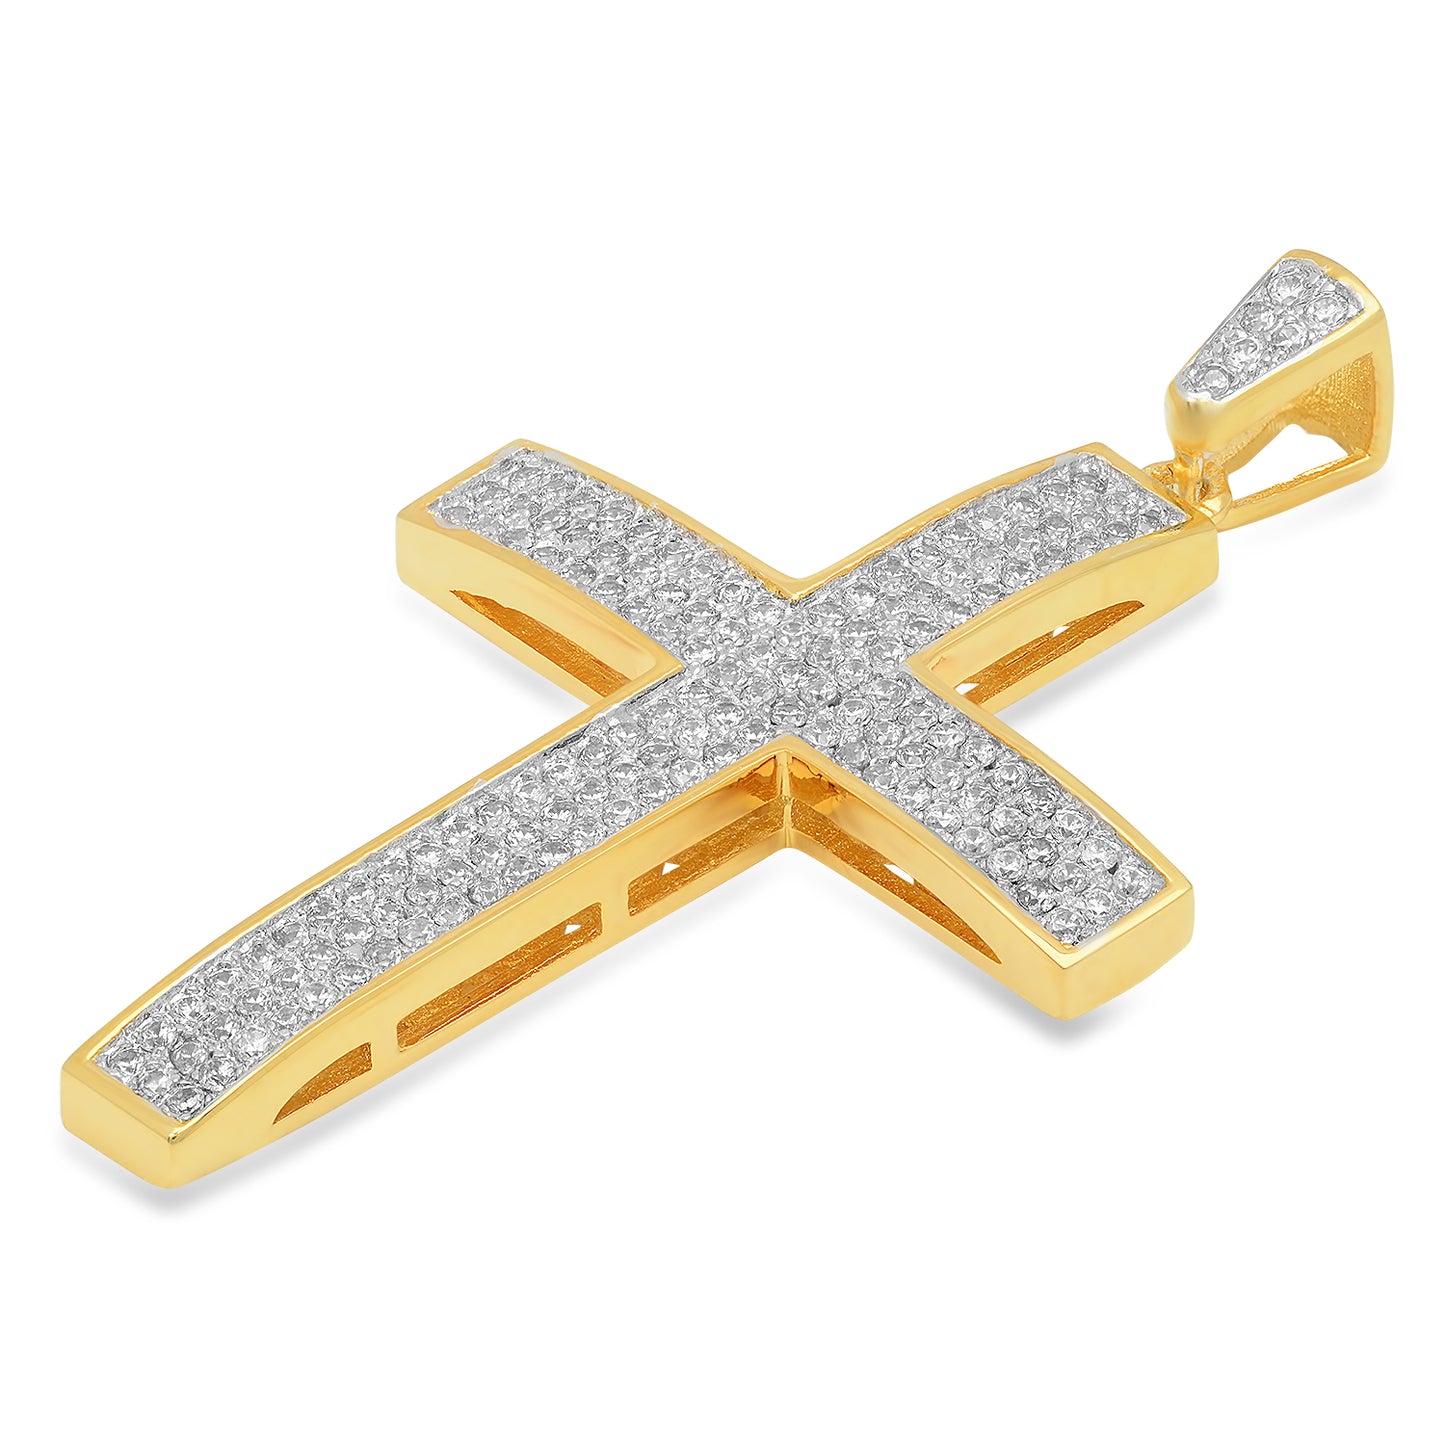 Large Iced Out 25.3mm x 37.8mm Two-Tone 14k Gold CZ Cross Pendant + Jewelry Polishing Cloth (SKU: TT-PDCZ1002)